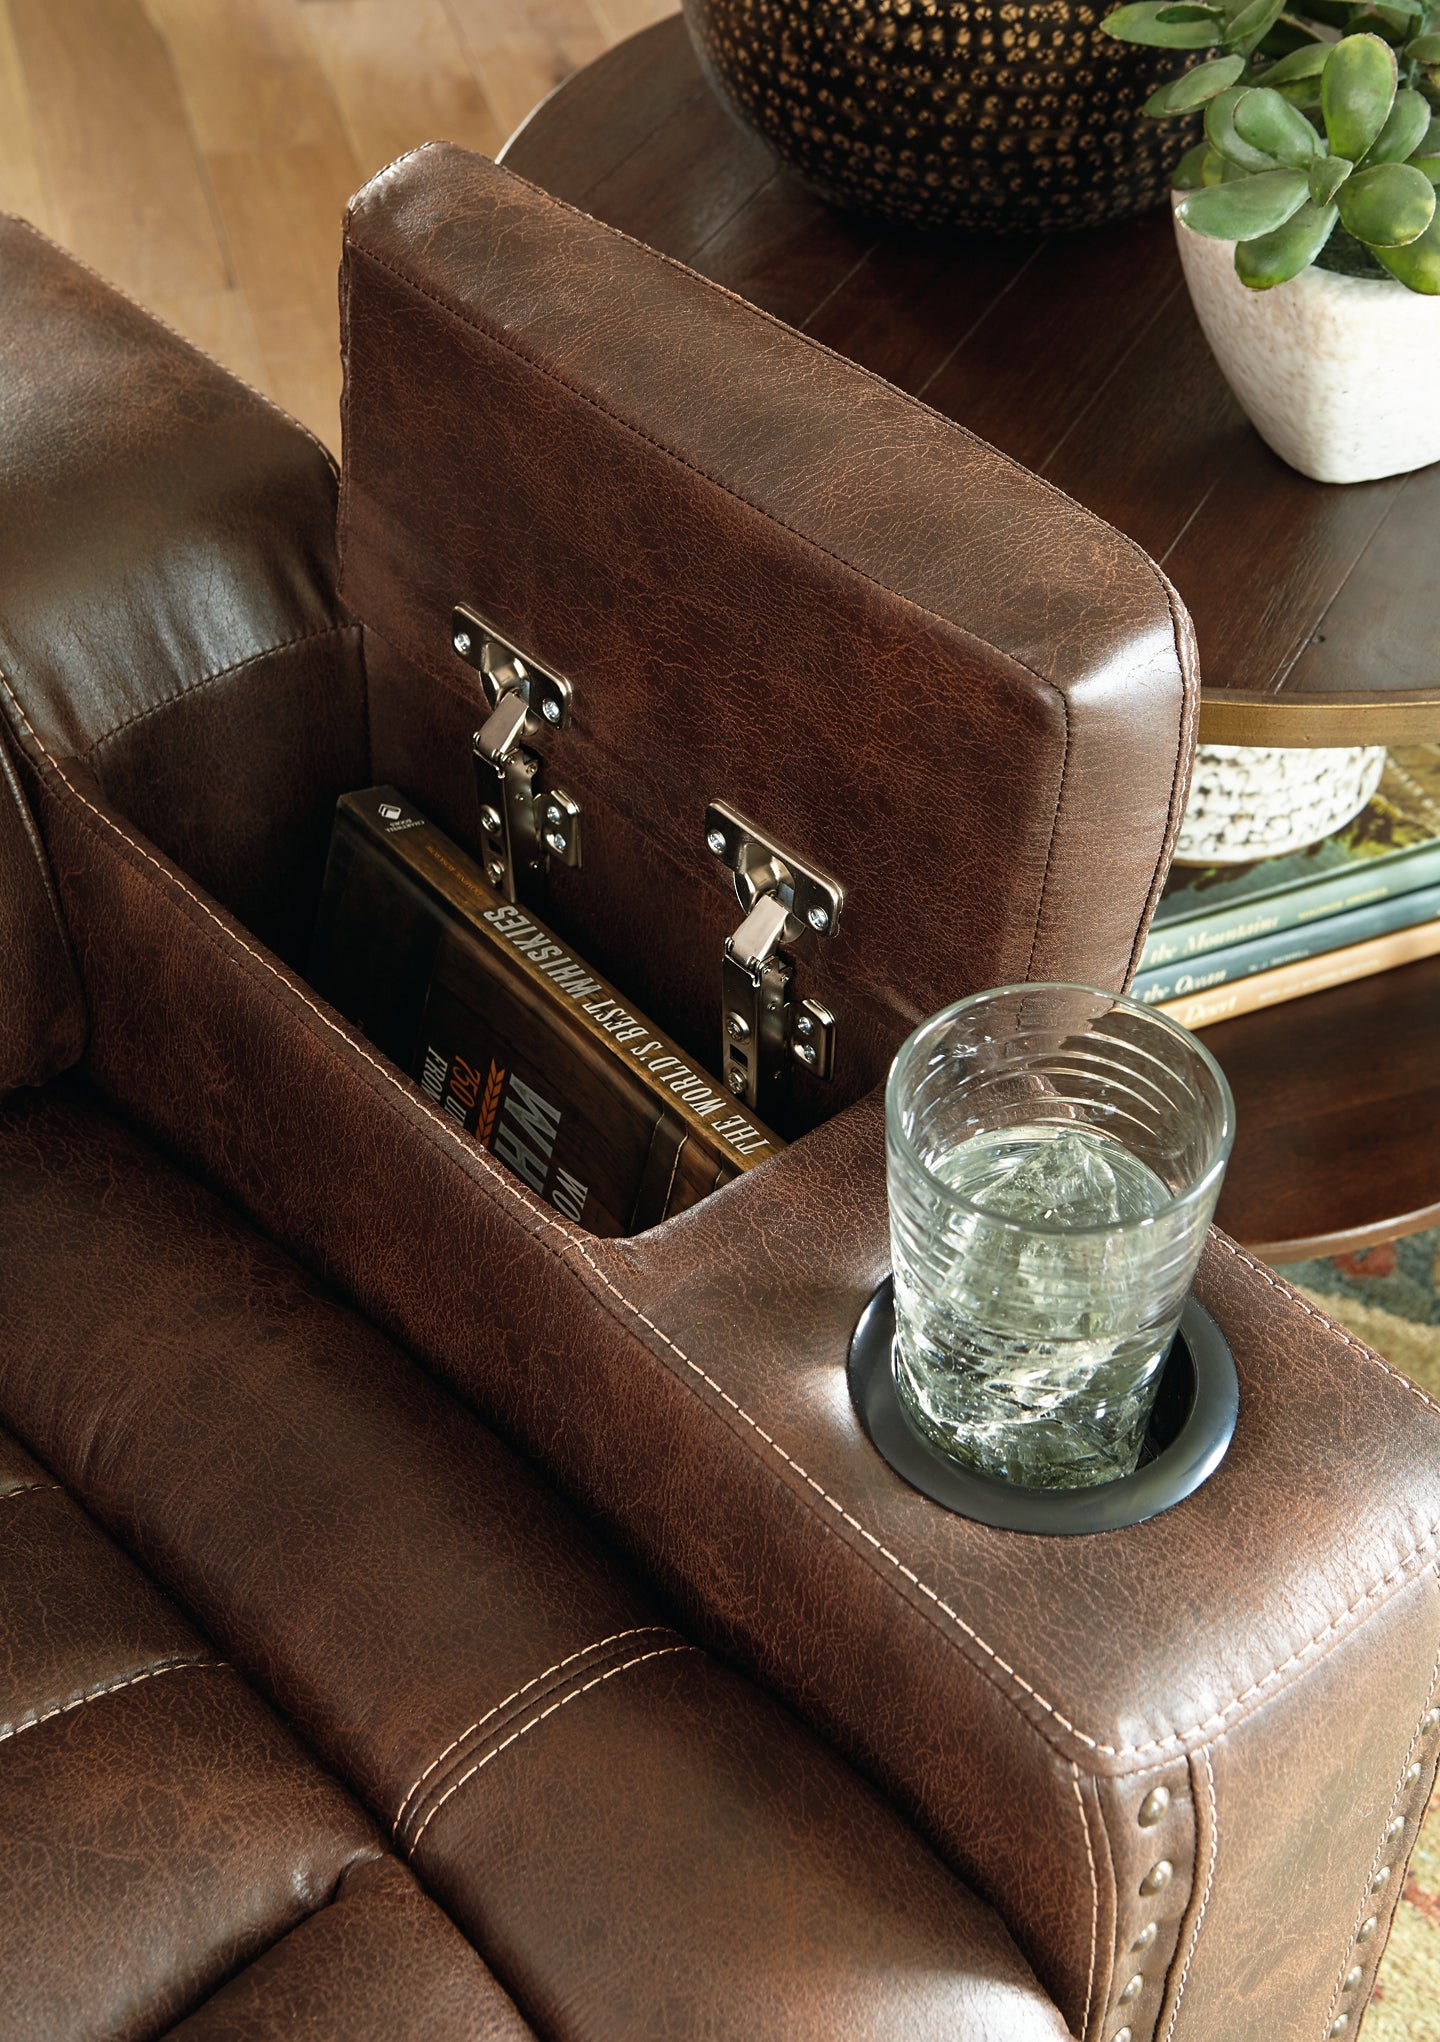 Owner's Box Sofa, Loveseat and Recliner JB's Furniture  Home Furniture, Home Decor, Furniture Store